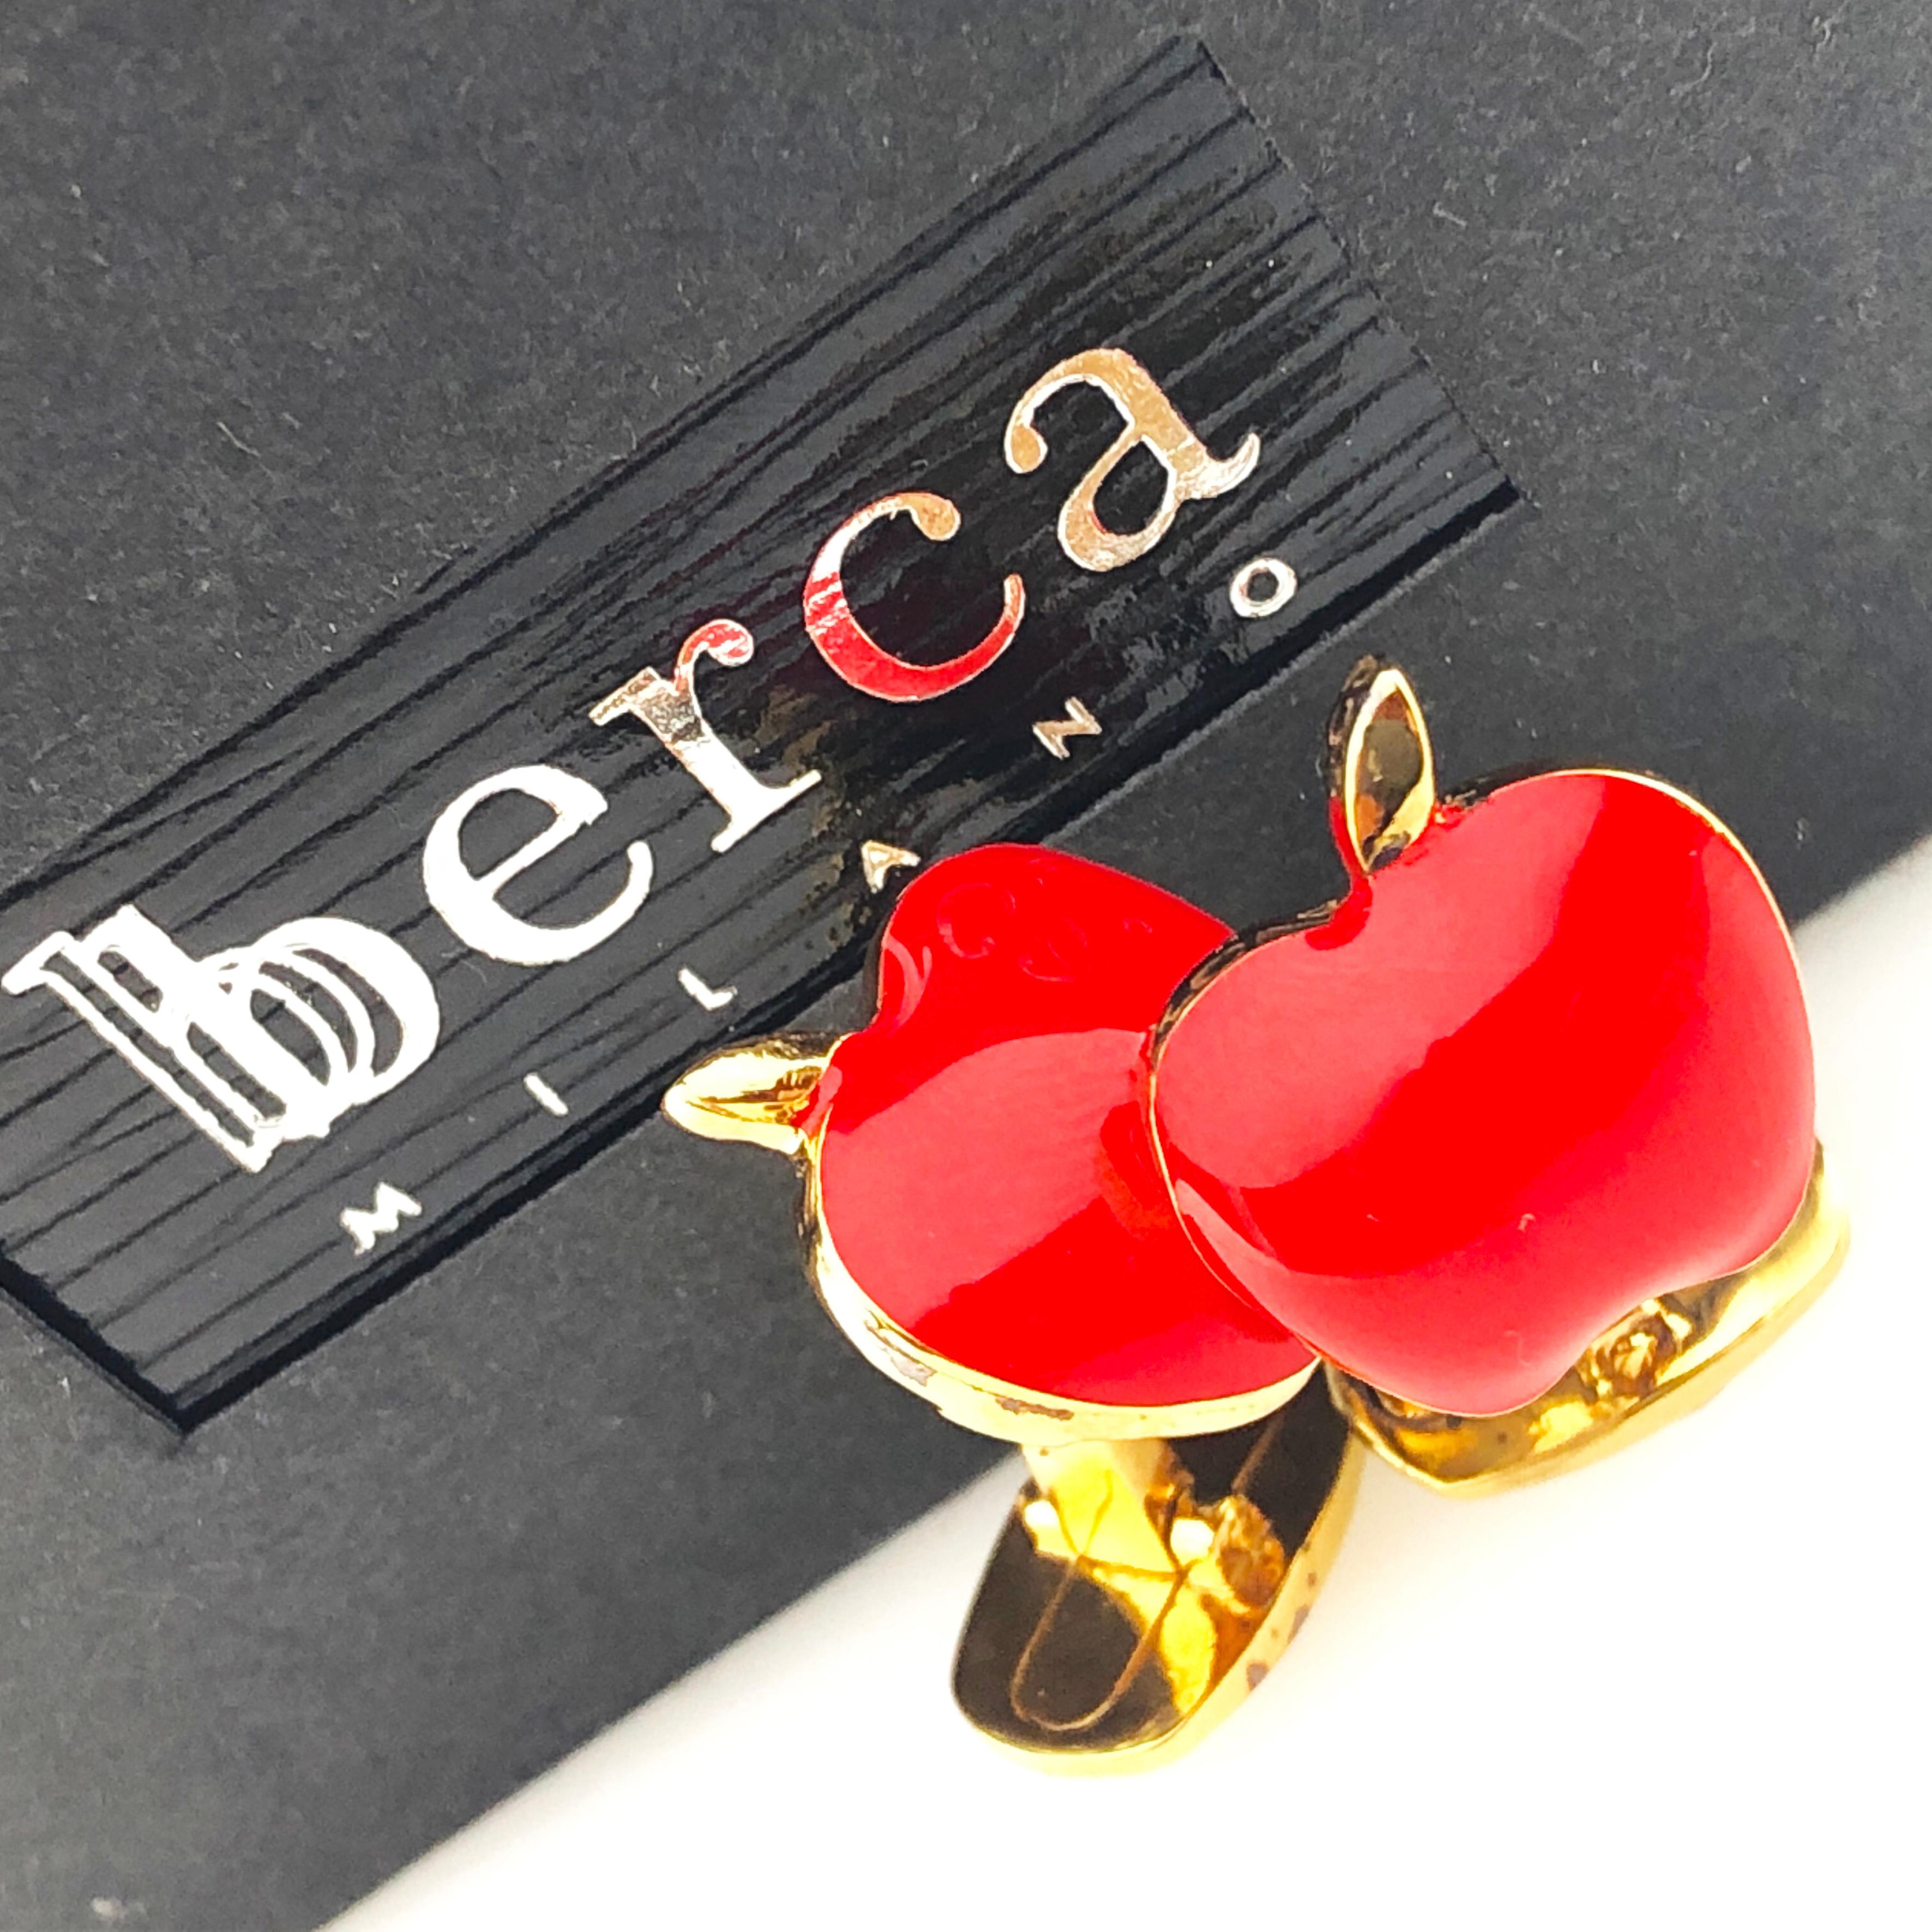 Berca Red Hand Enameled Apple Shaped Sterling Silver Gold-Plated Cufflinks 1